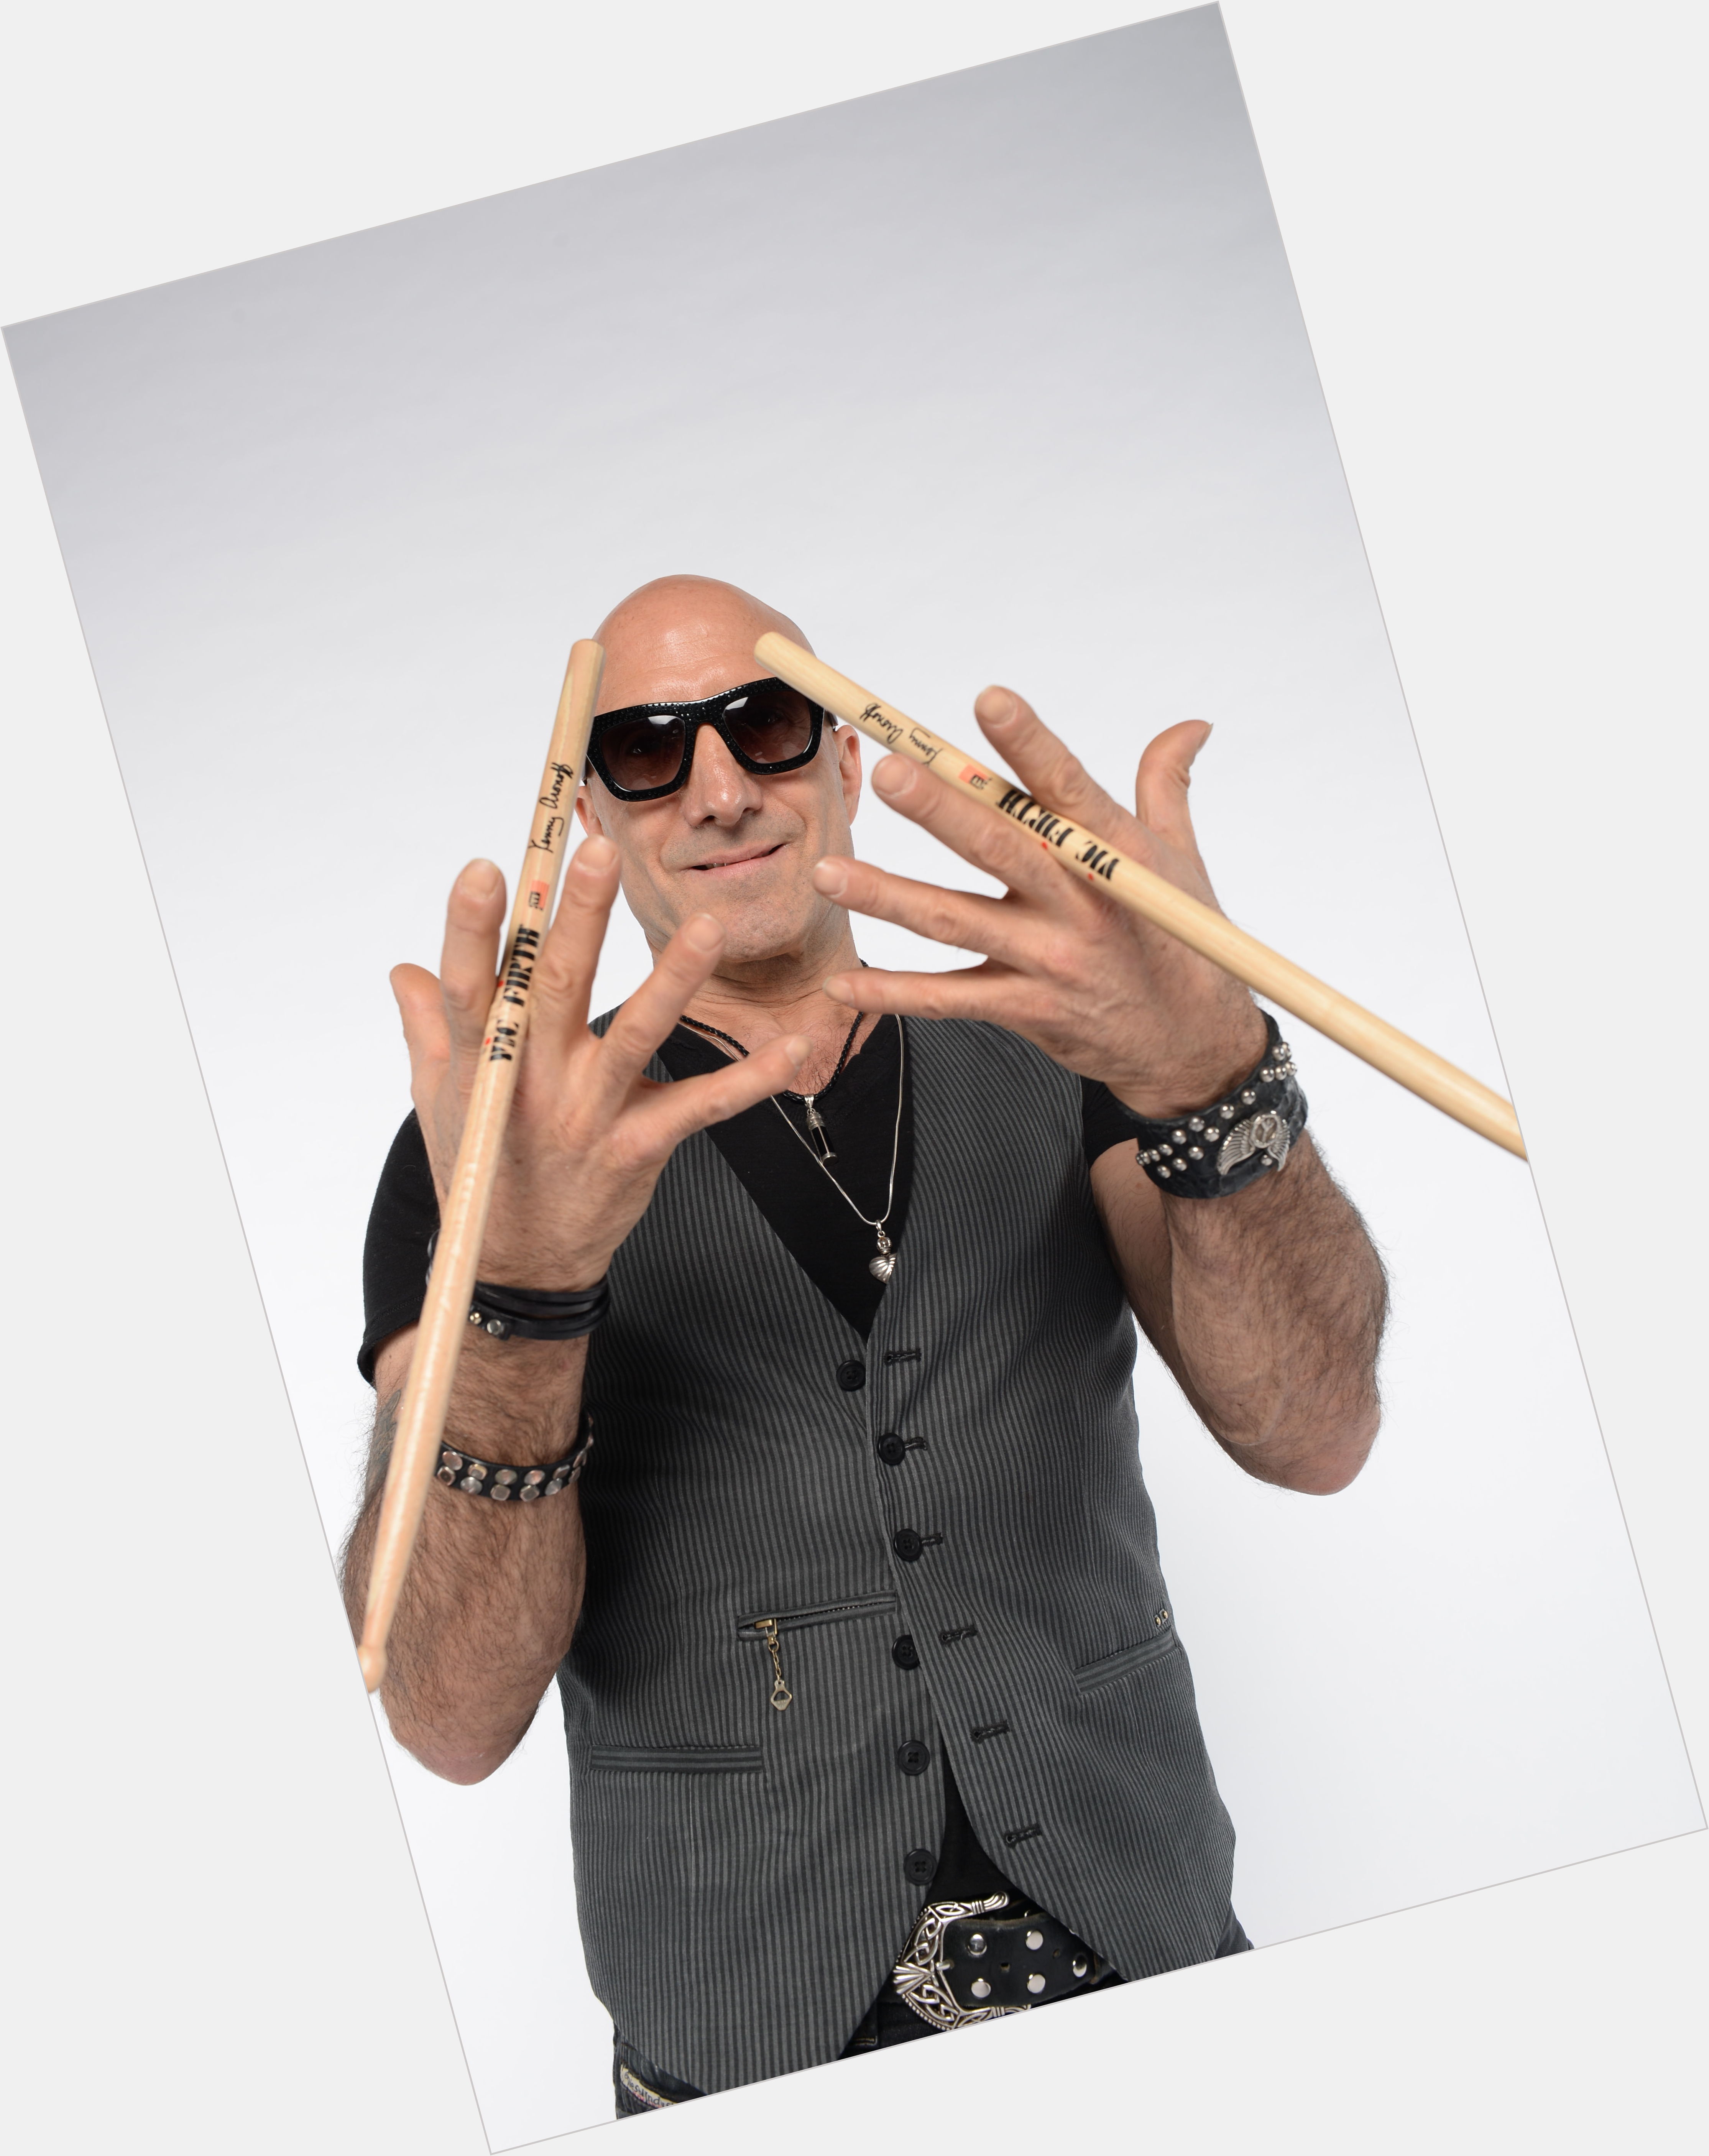 <a href="/hot-men/kenny-aronoff/where-dating-news-photos">Kenny Aronoff</a> Average body,  bald hair & hairstyles